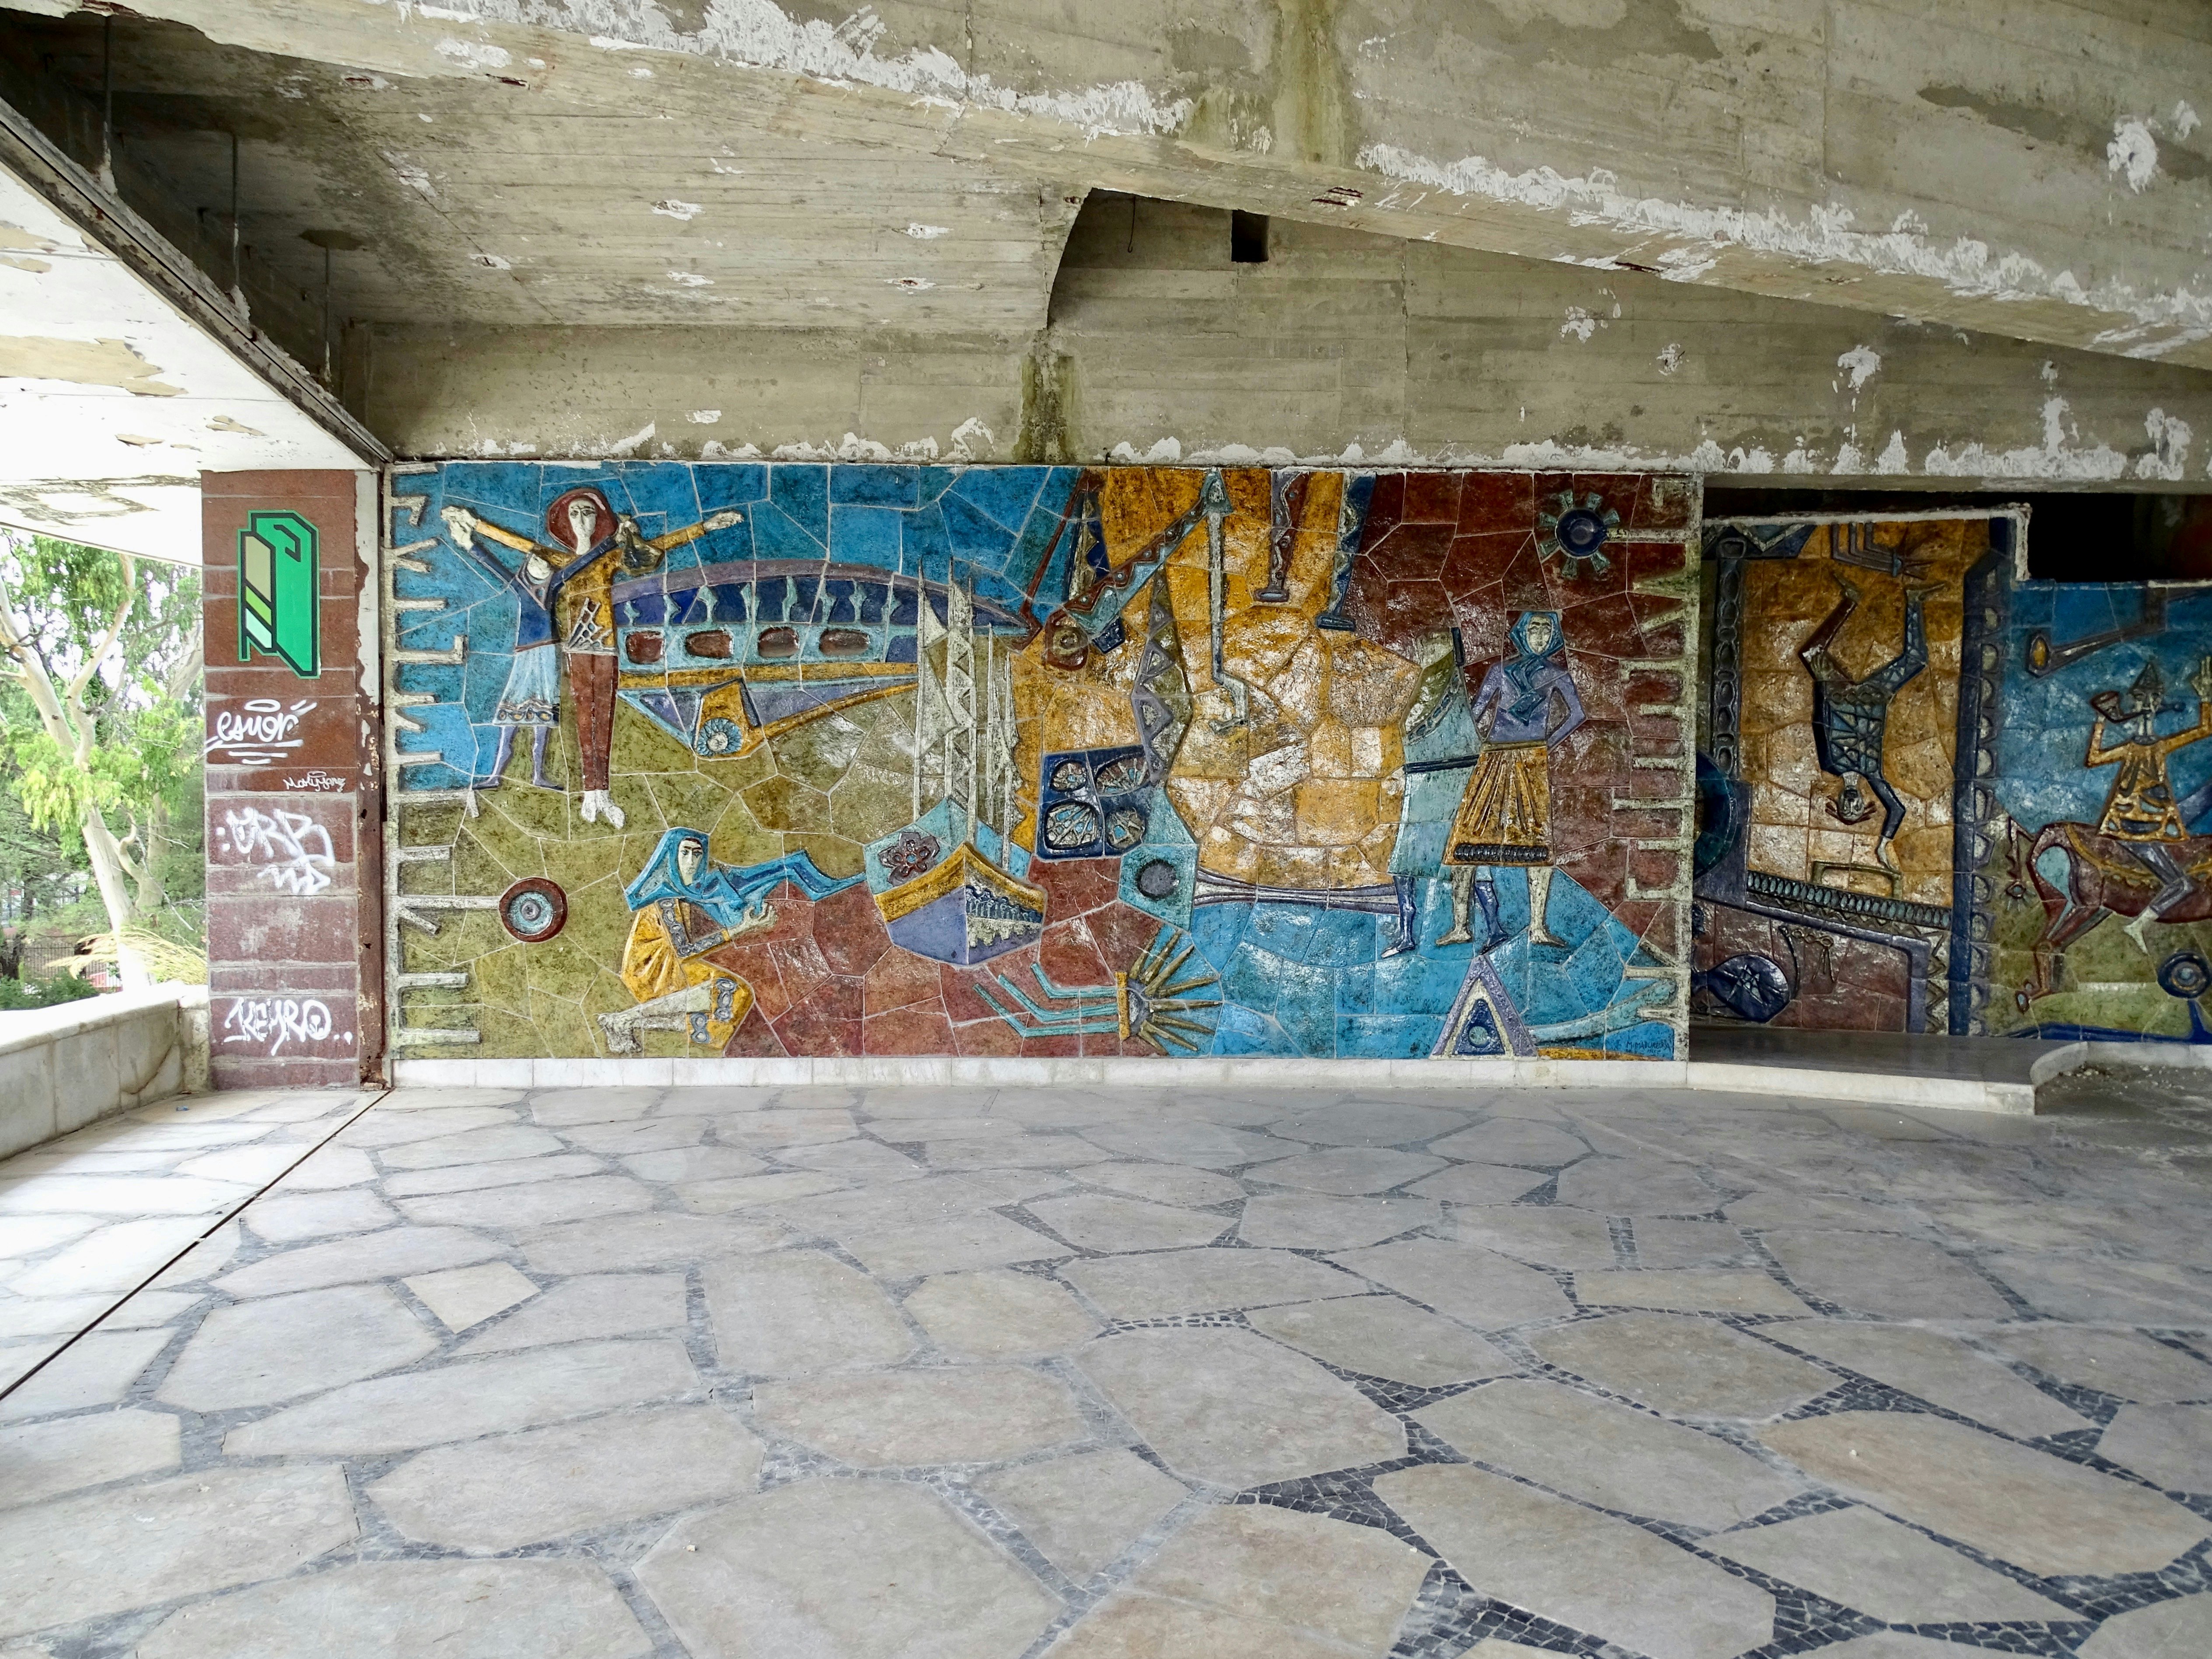 A painted mural on tiles at the Miradouro Panoramico de Monsanto.